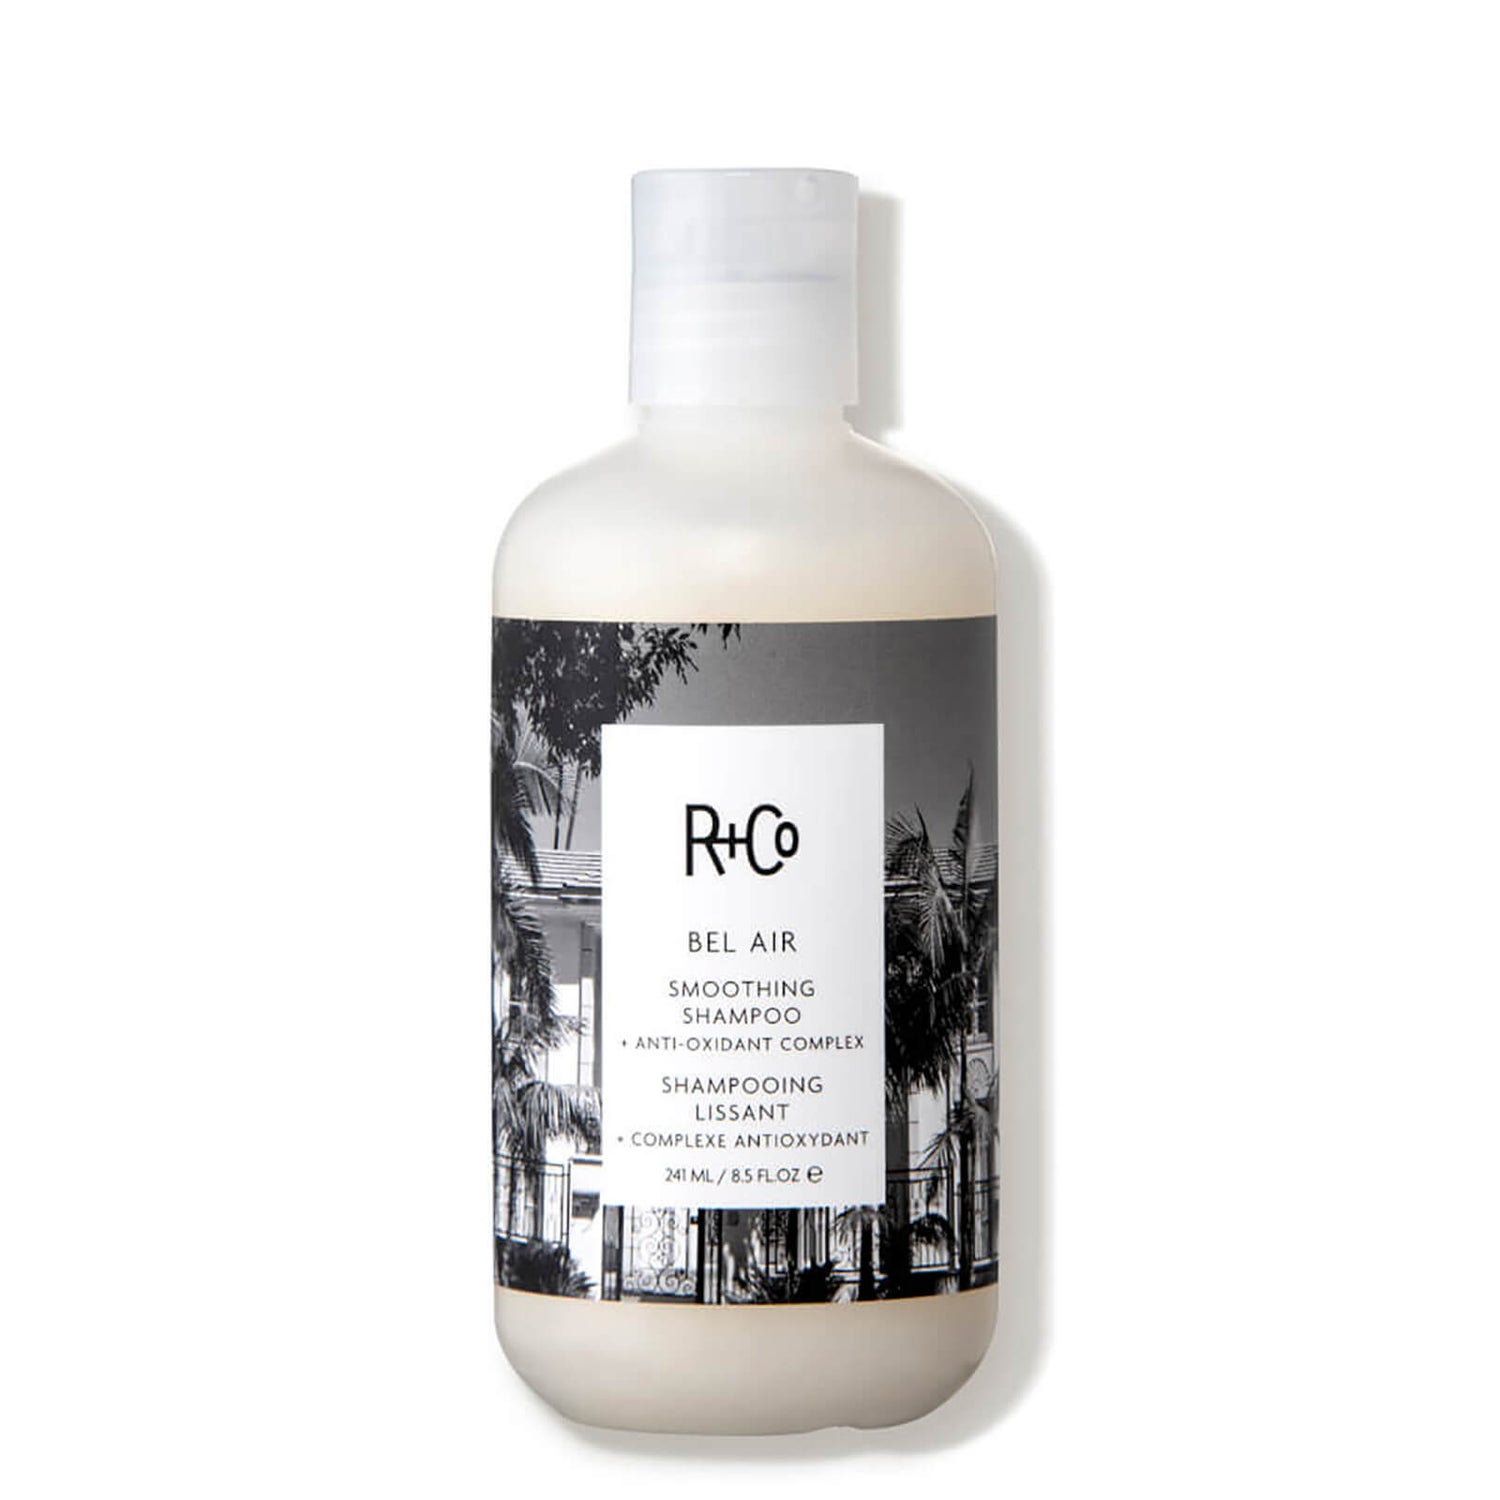 R+Co Bel Air Smoothing Shampoo Anti-Oxidant Complex (Various Sizes)